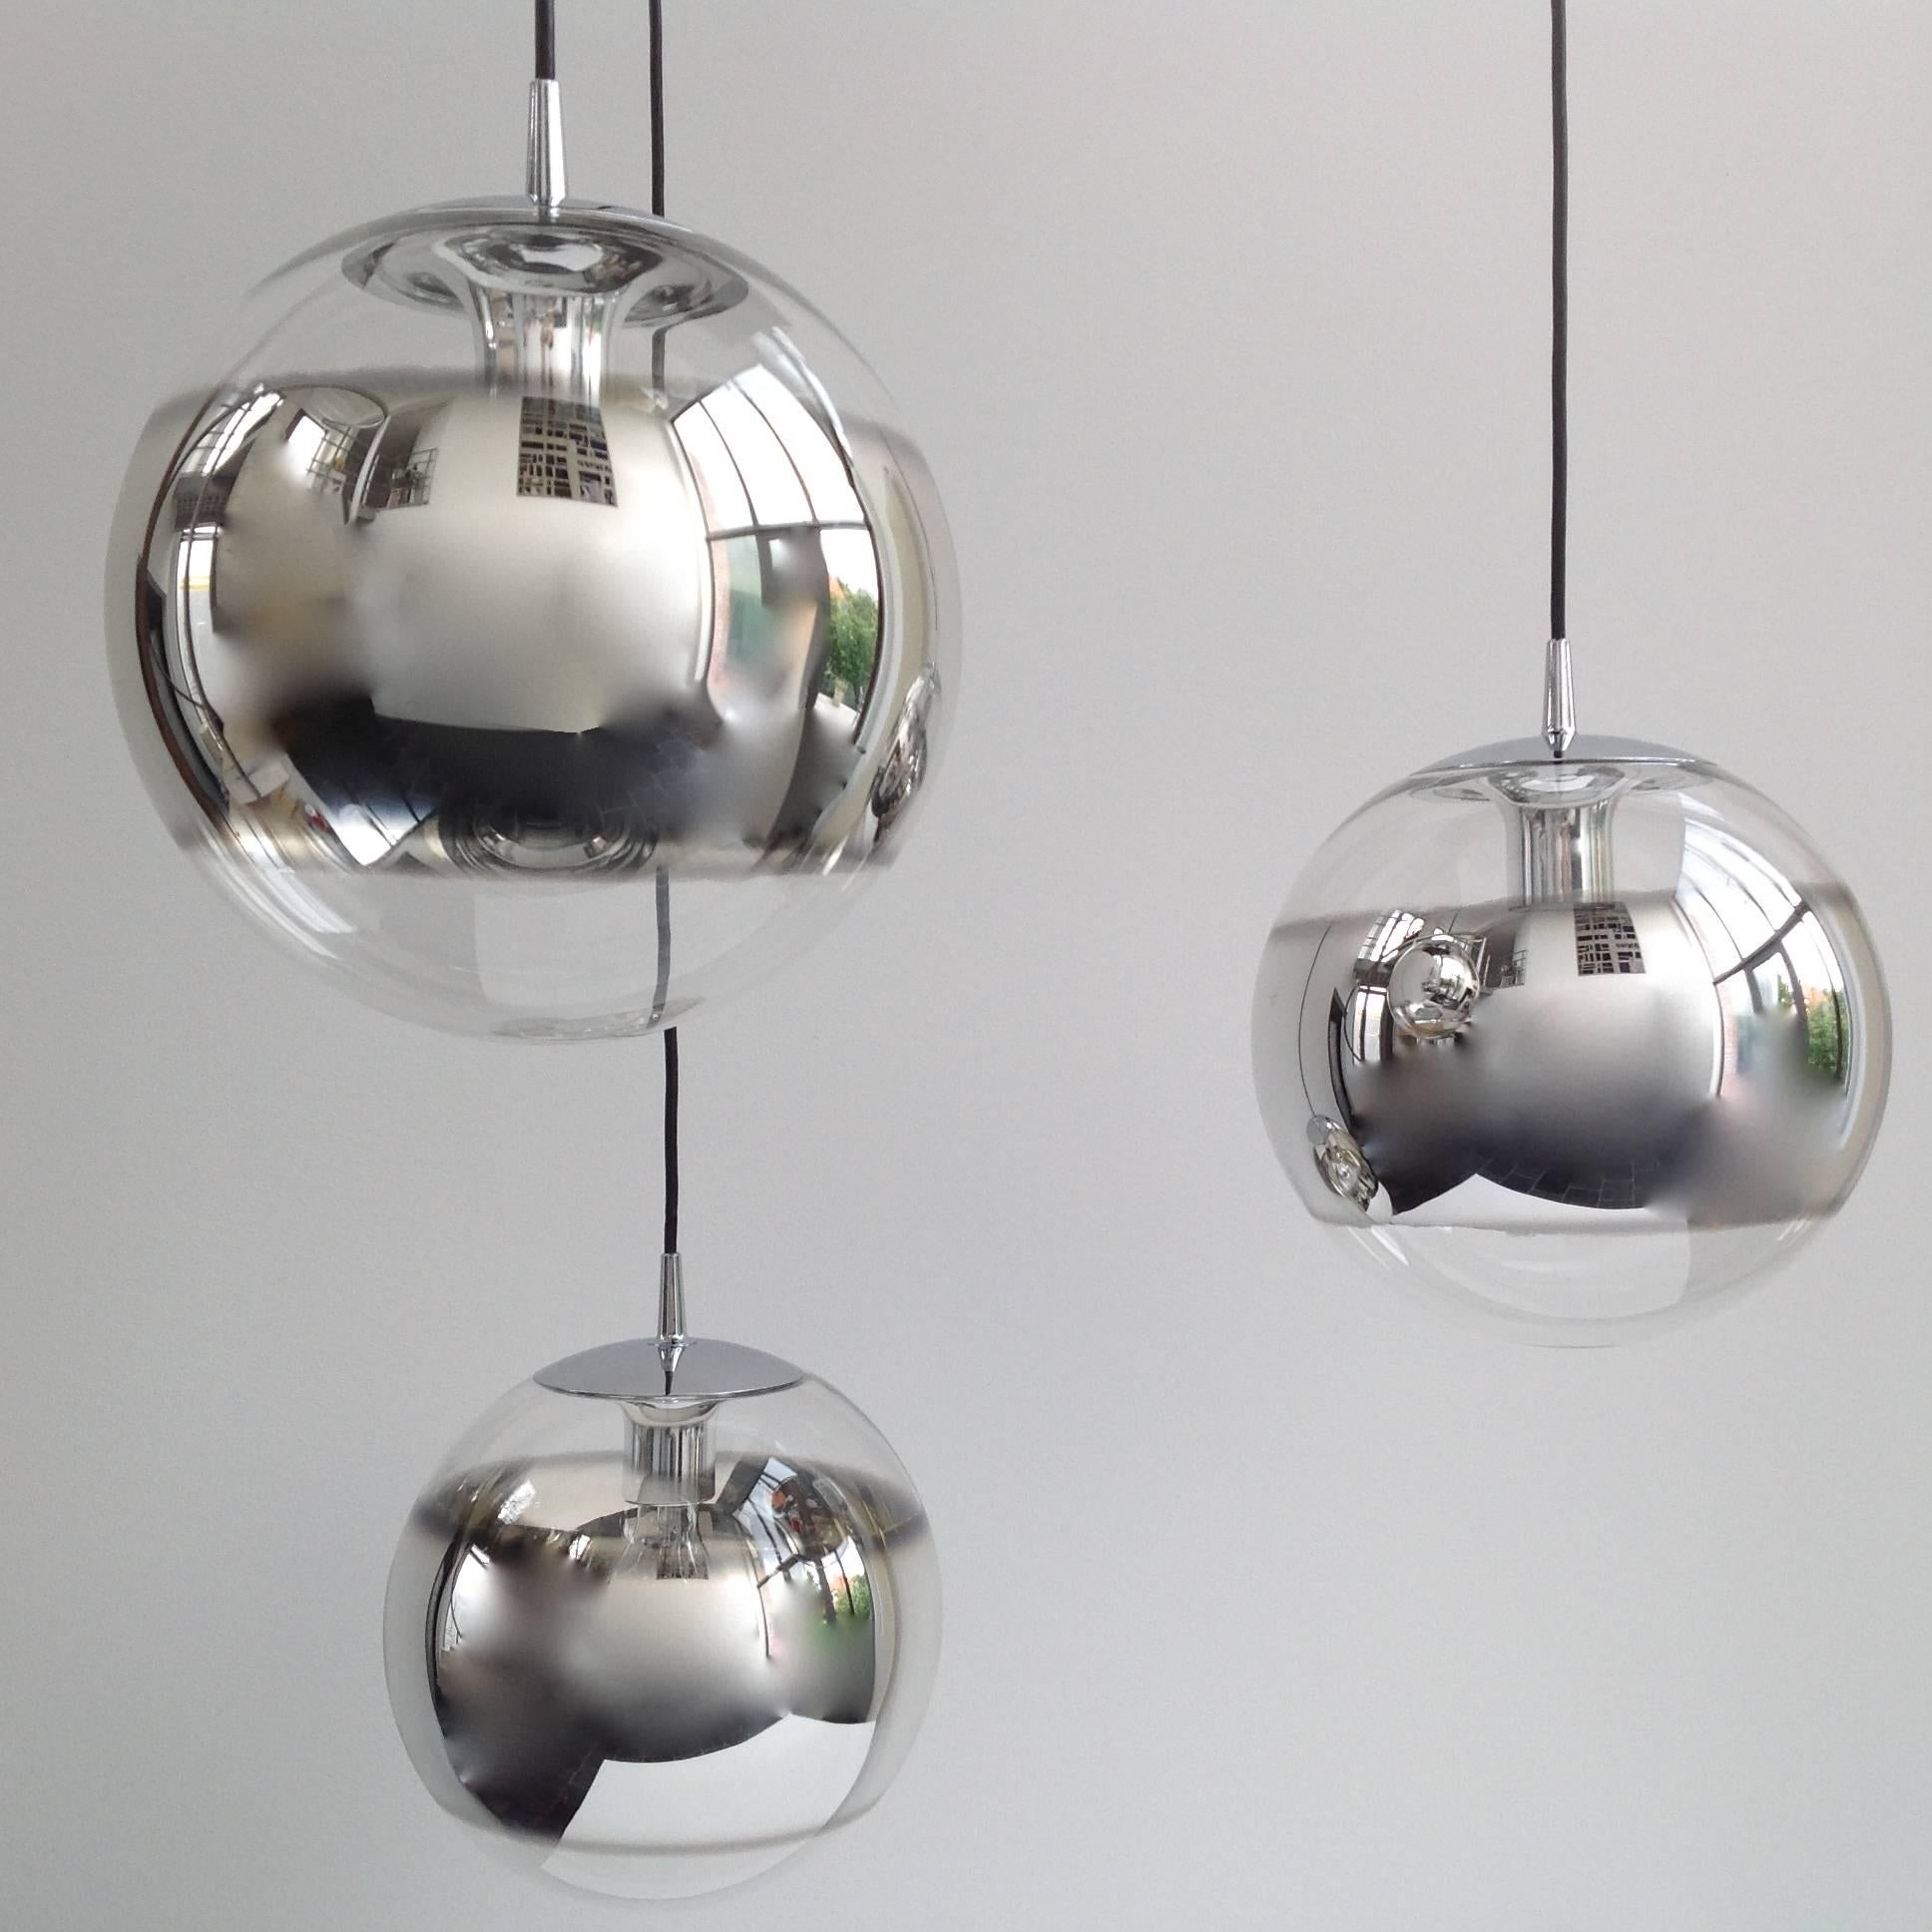 Stunning three mirror glass globes chandelier.
Each glass globe features an outstanding design with amazing effect.
Glass globes vary in different heights.
The length of the cable can be adjusted on request.

More pictures and with a higher